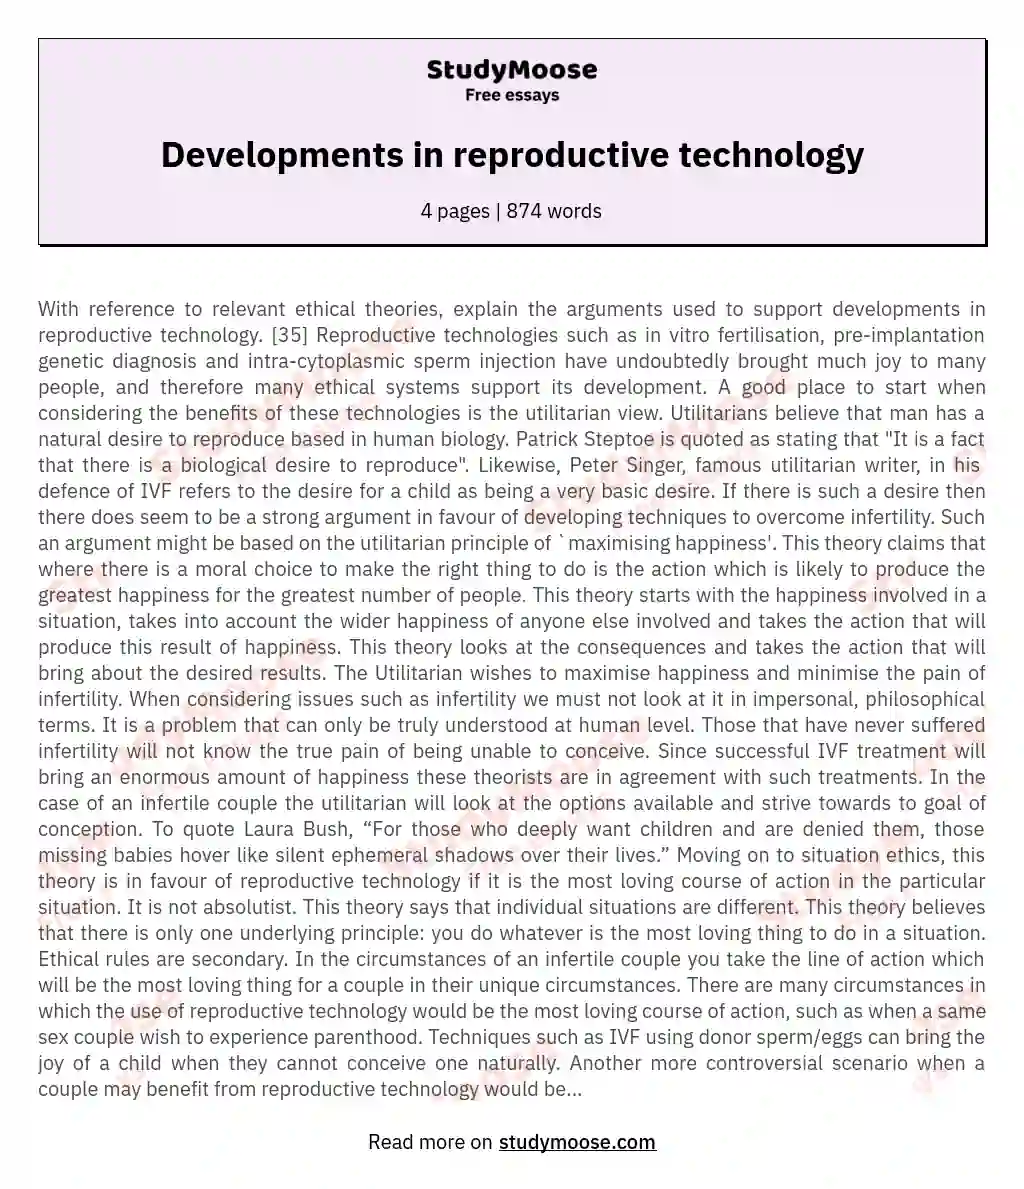 Developments in reproductive technology